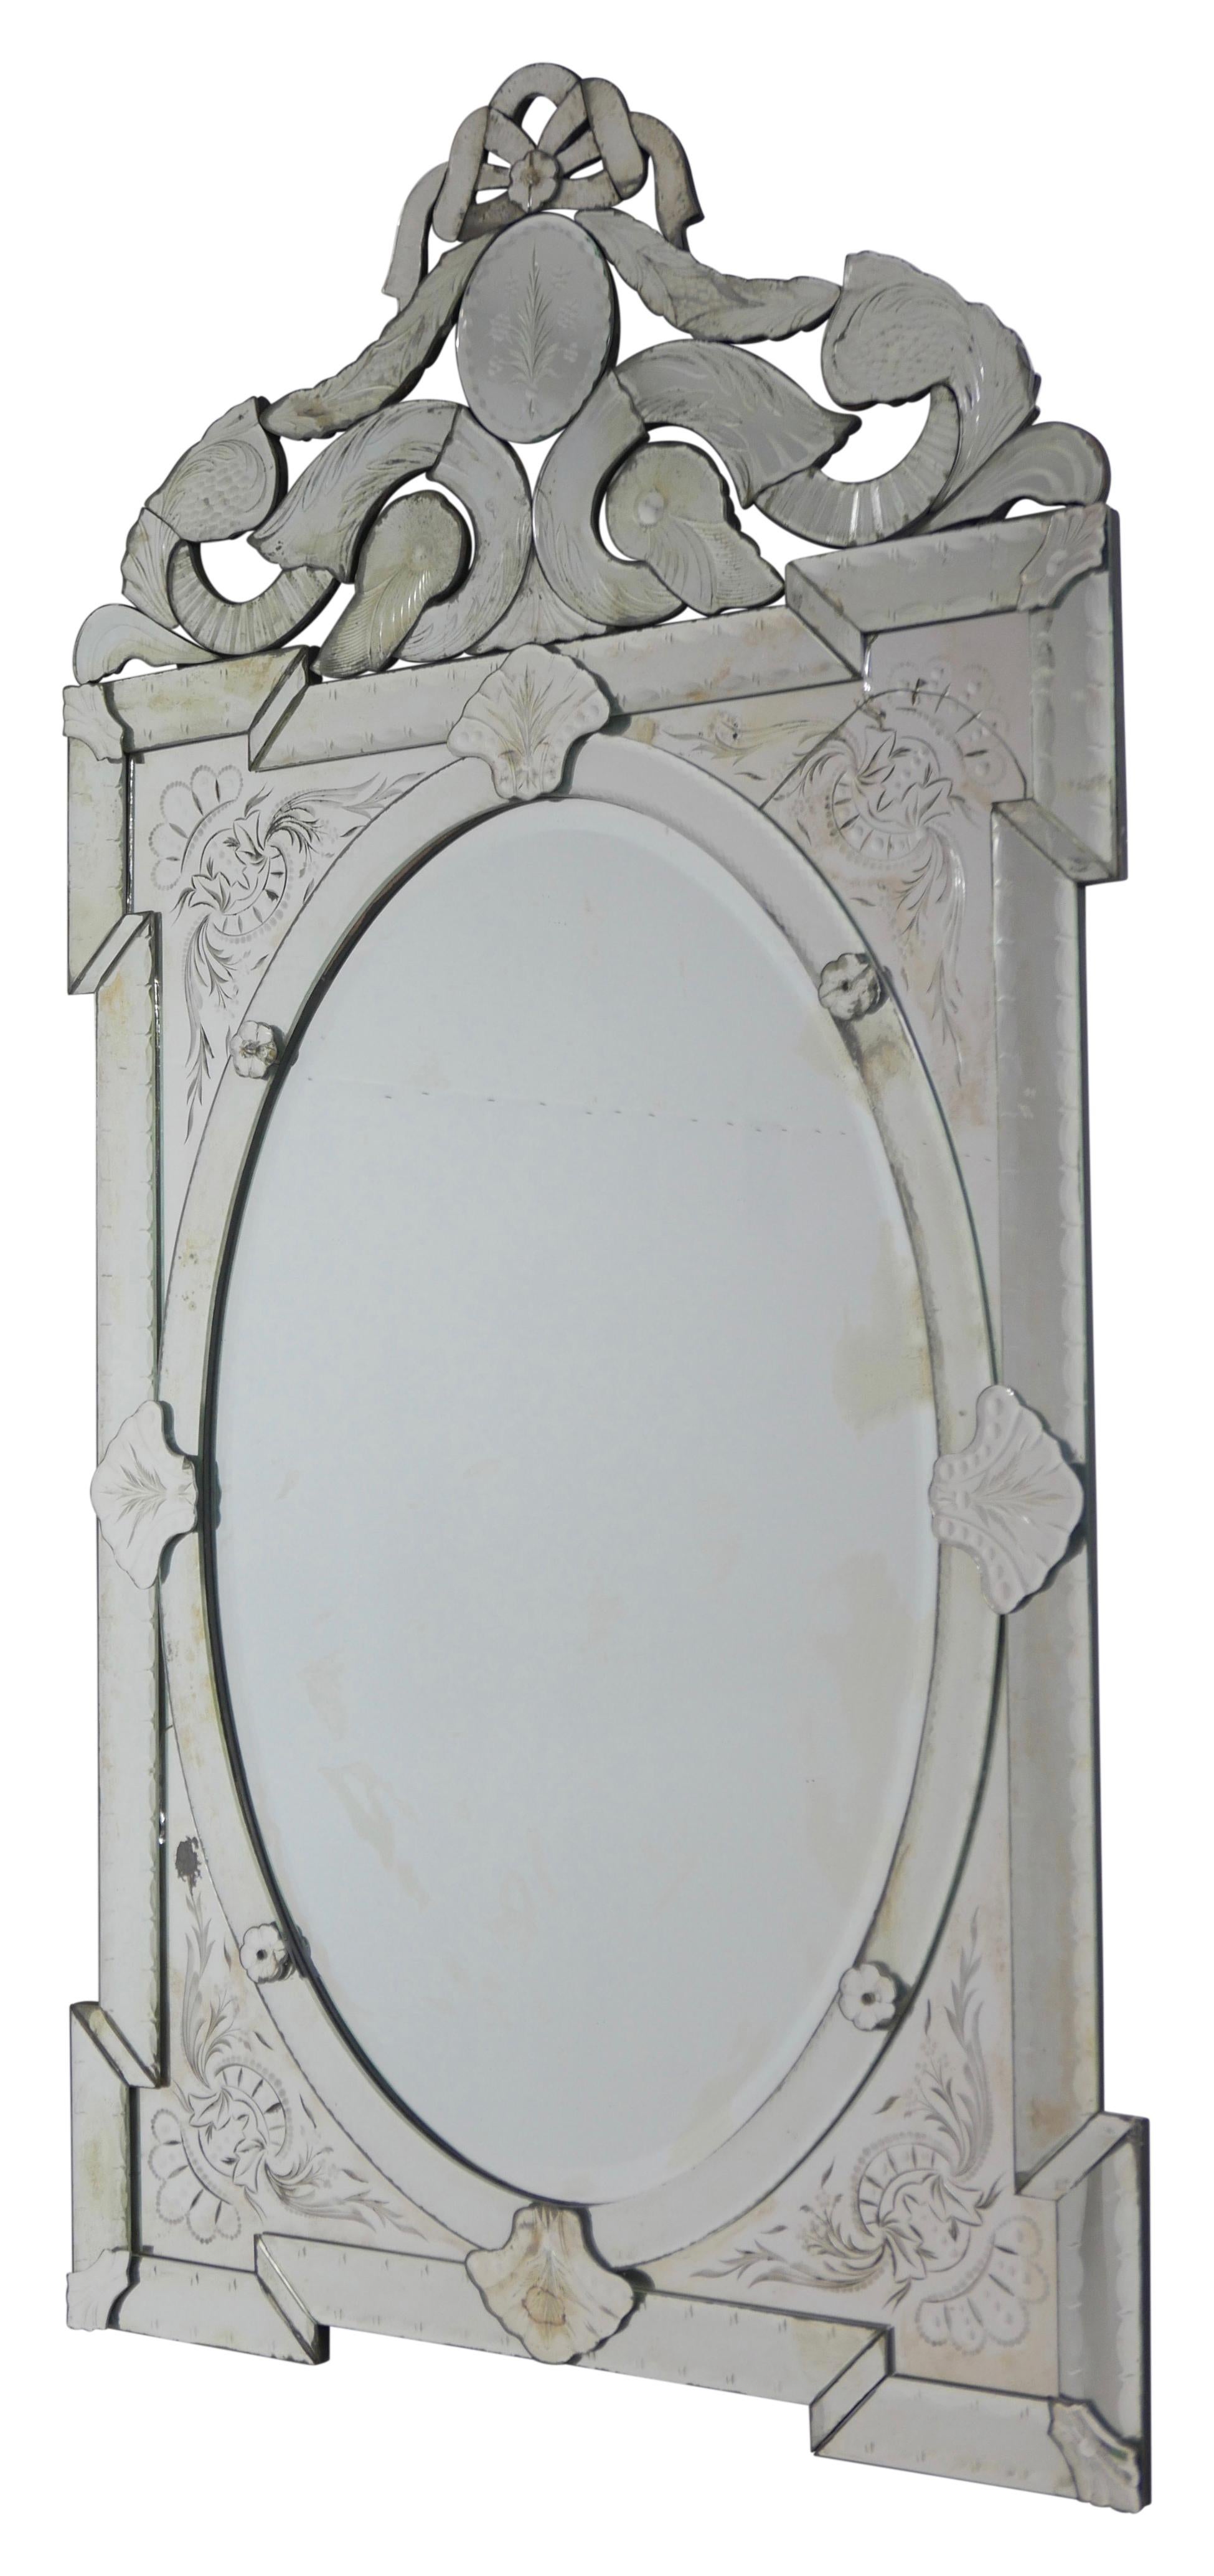 Impressive scale Venetian Pier Mirror with floral and leaf etched panels, very elaborate detailing throughout. Original mirrored panels showing expected signs of age. There are two cracked panels inset Upper Right and inset Lower Left. These could